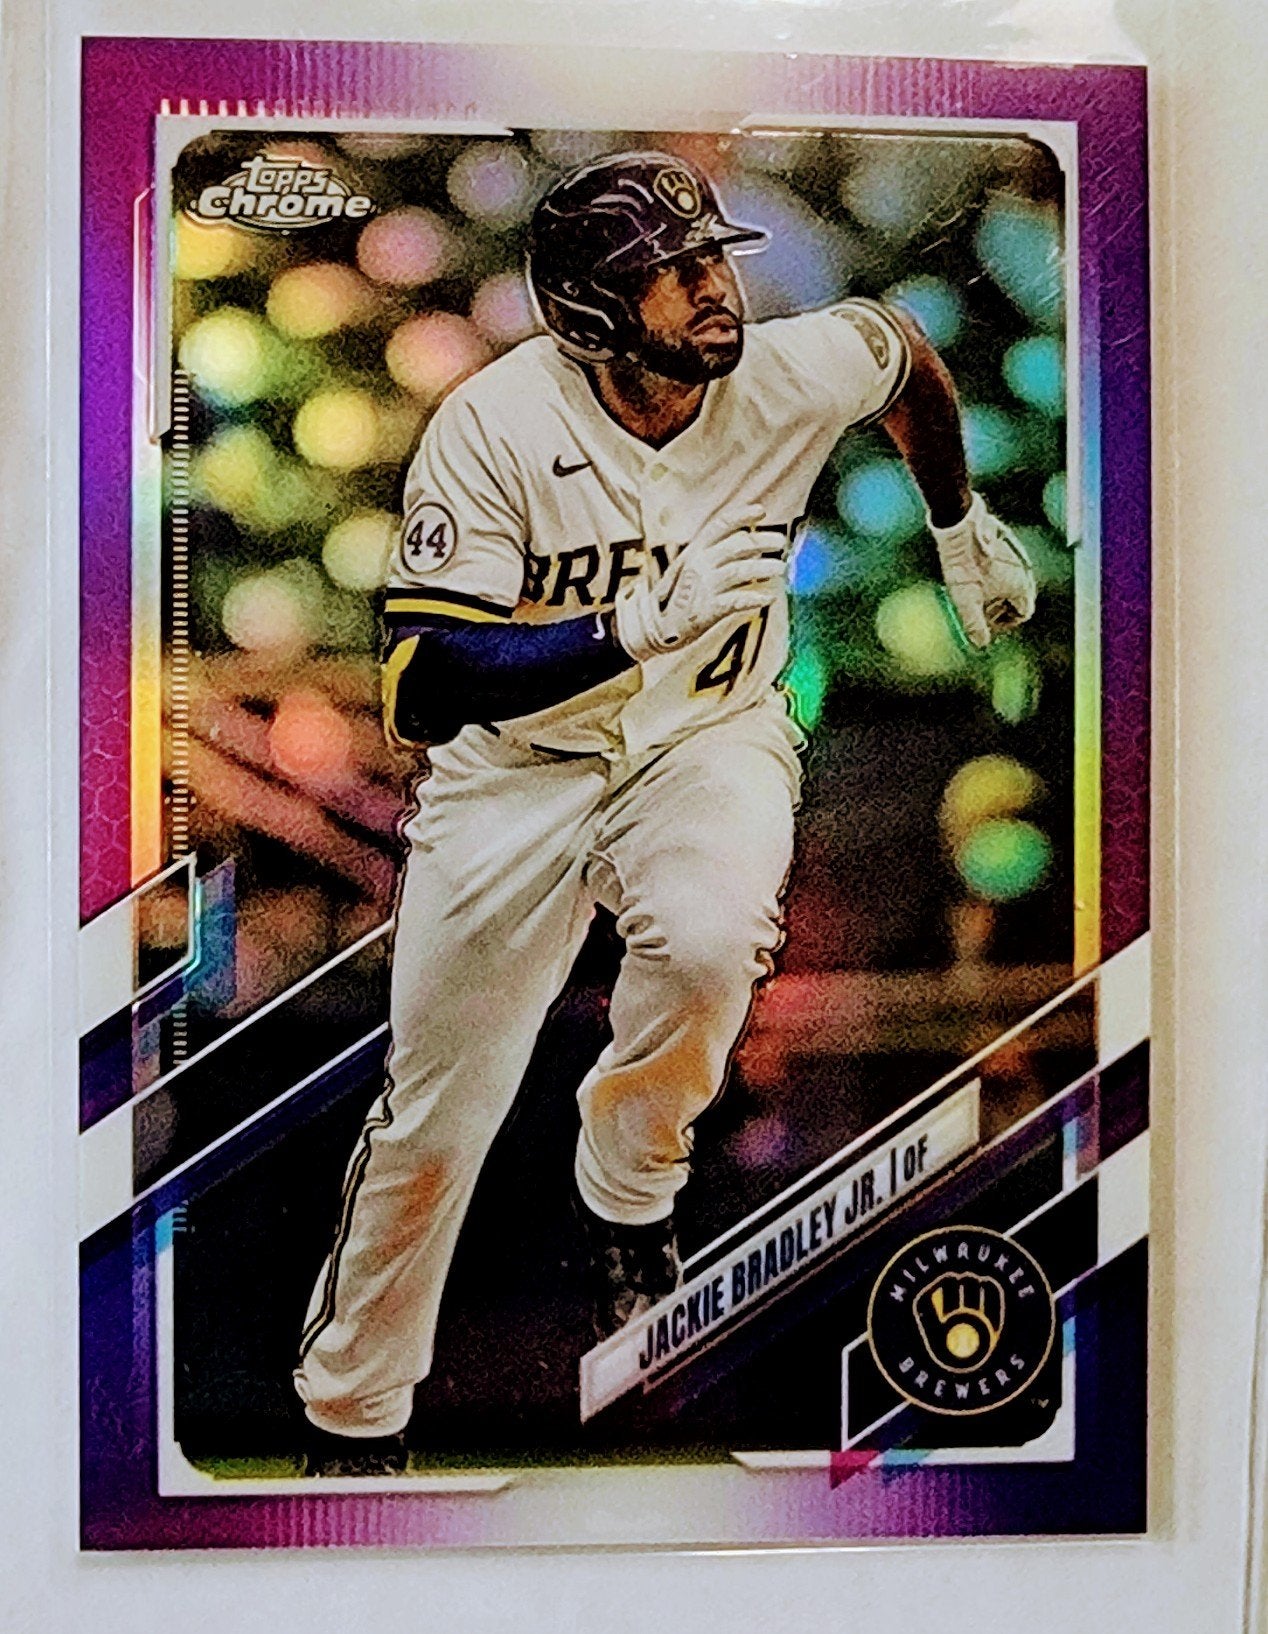 2021 Topps Chrome Update Jackie Bradley Jr Purple Refractor Baseball Card AVM1 simple Xclusive Collectibles   